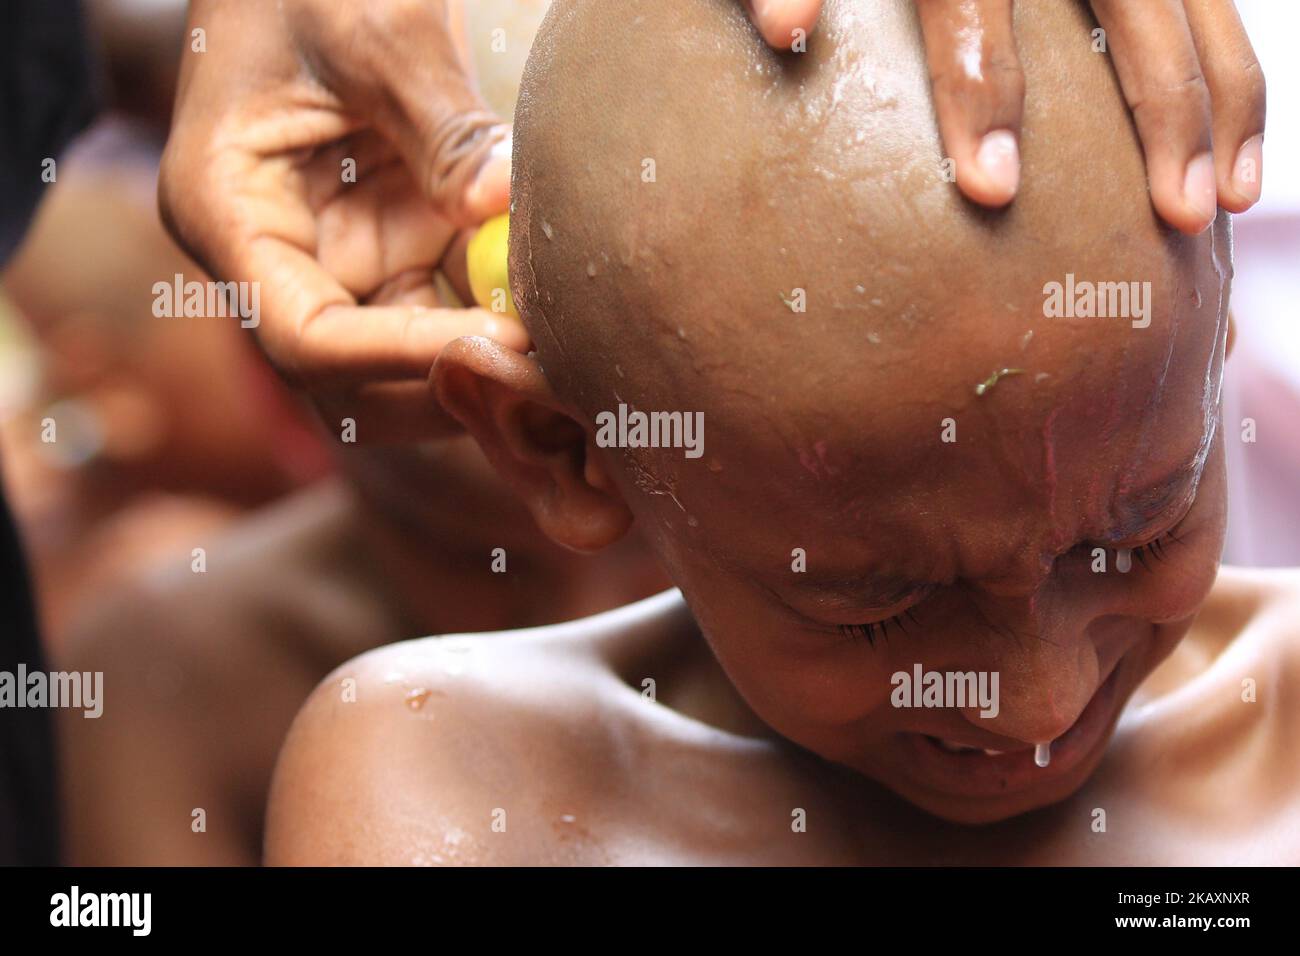 A Sri Lankan boy reacts as his shaved-head is applied with Lime by a Buddhist monk in preparation for a ceremony to be ordained as novice Buddhist monks (samanera) in Colombo, Sri Lanka on Sunday 29 April 2018 which also marks the Vesak full moon poya day, celebrated by Buddhists to mark three momentous events in Lord Buddha's life – his birth, enlightenment, and his departure from the human world. (Photo by Tharaka Basnayaka/NurPhoto) Stock Photo